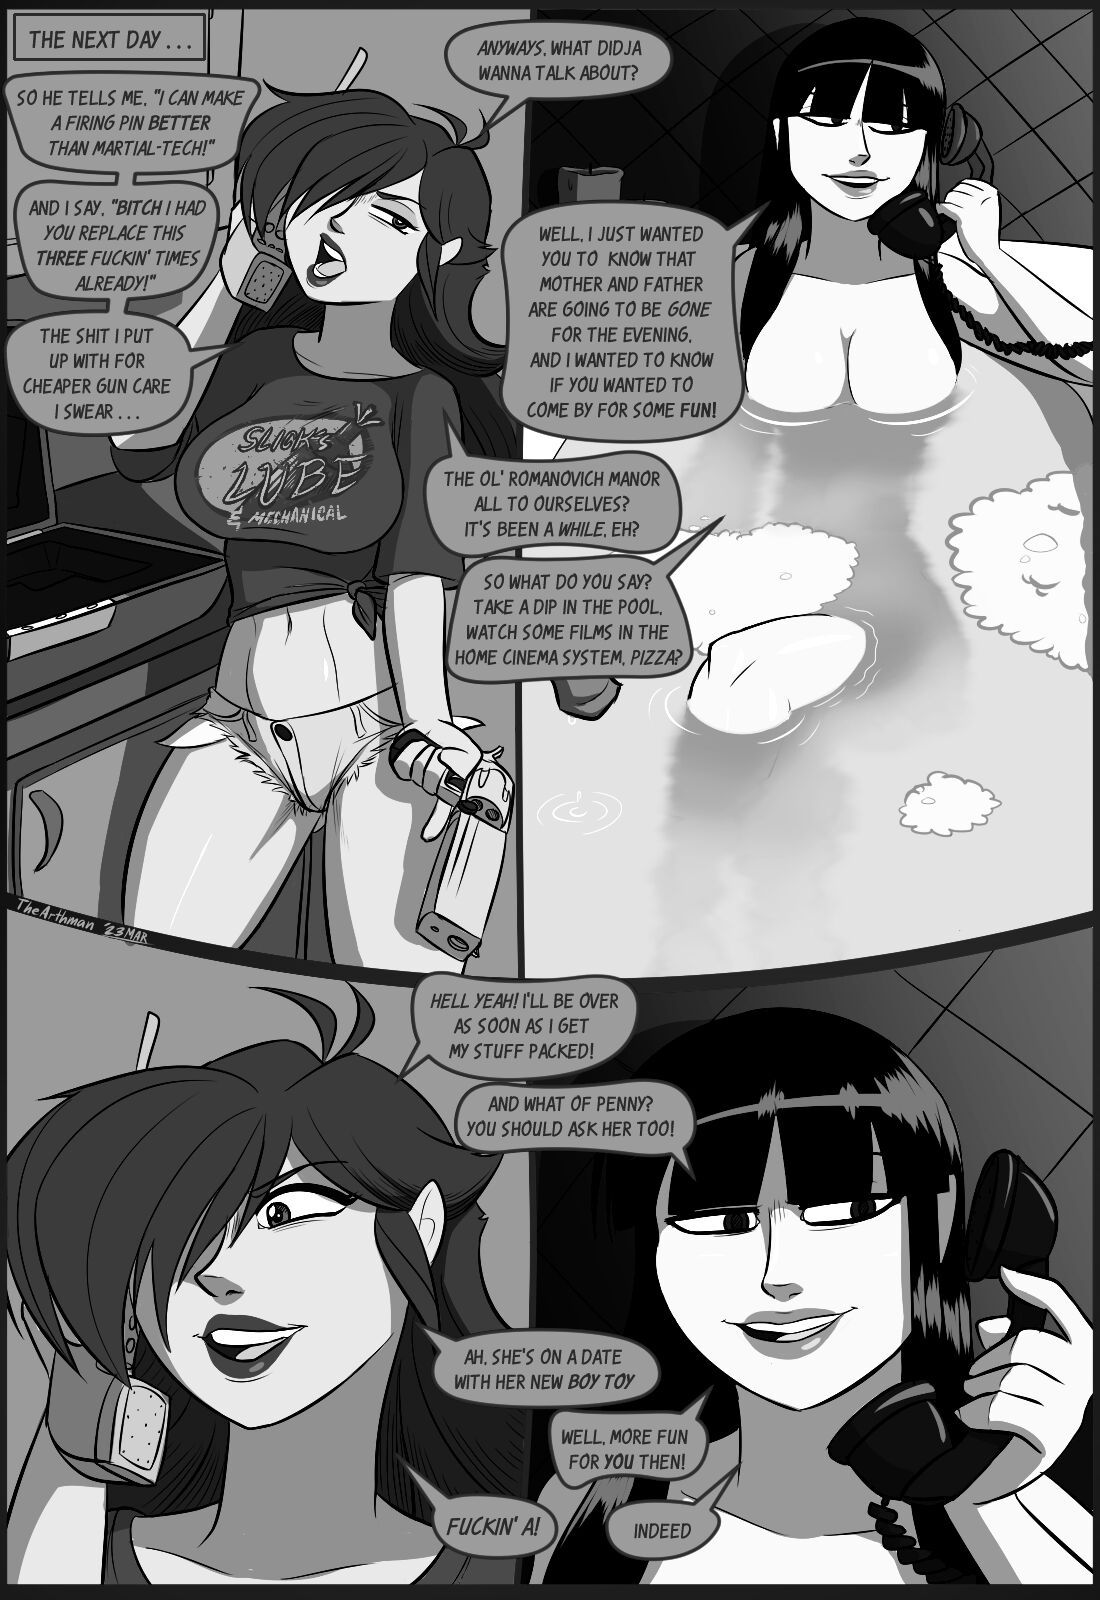 Dirtwater - Chapter 7 - Path of Sin Porn Comic english 06